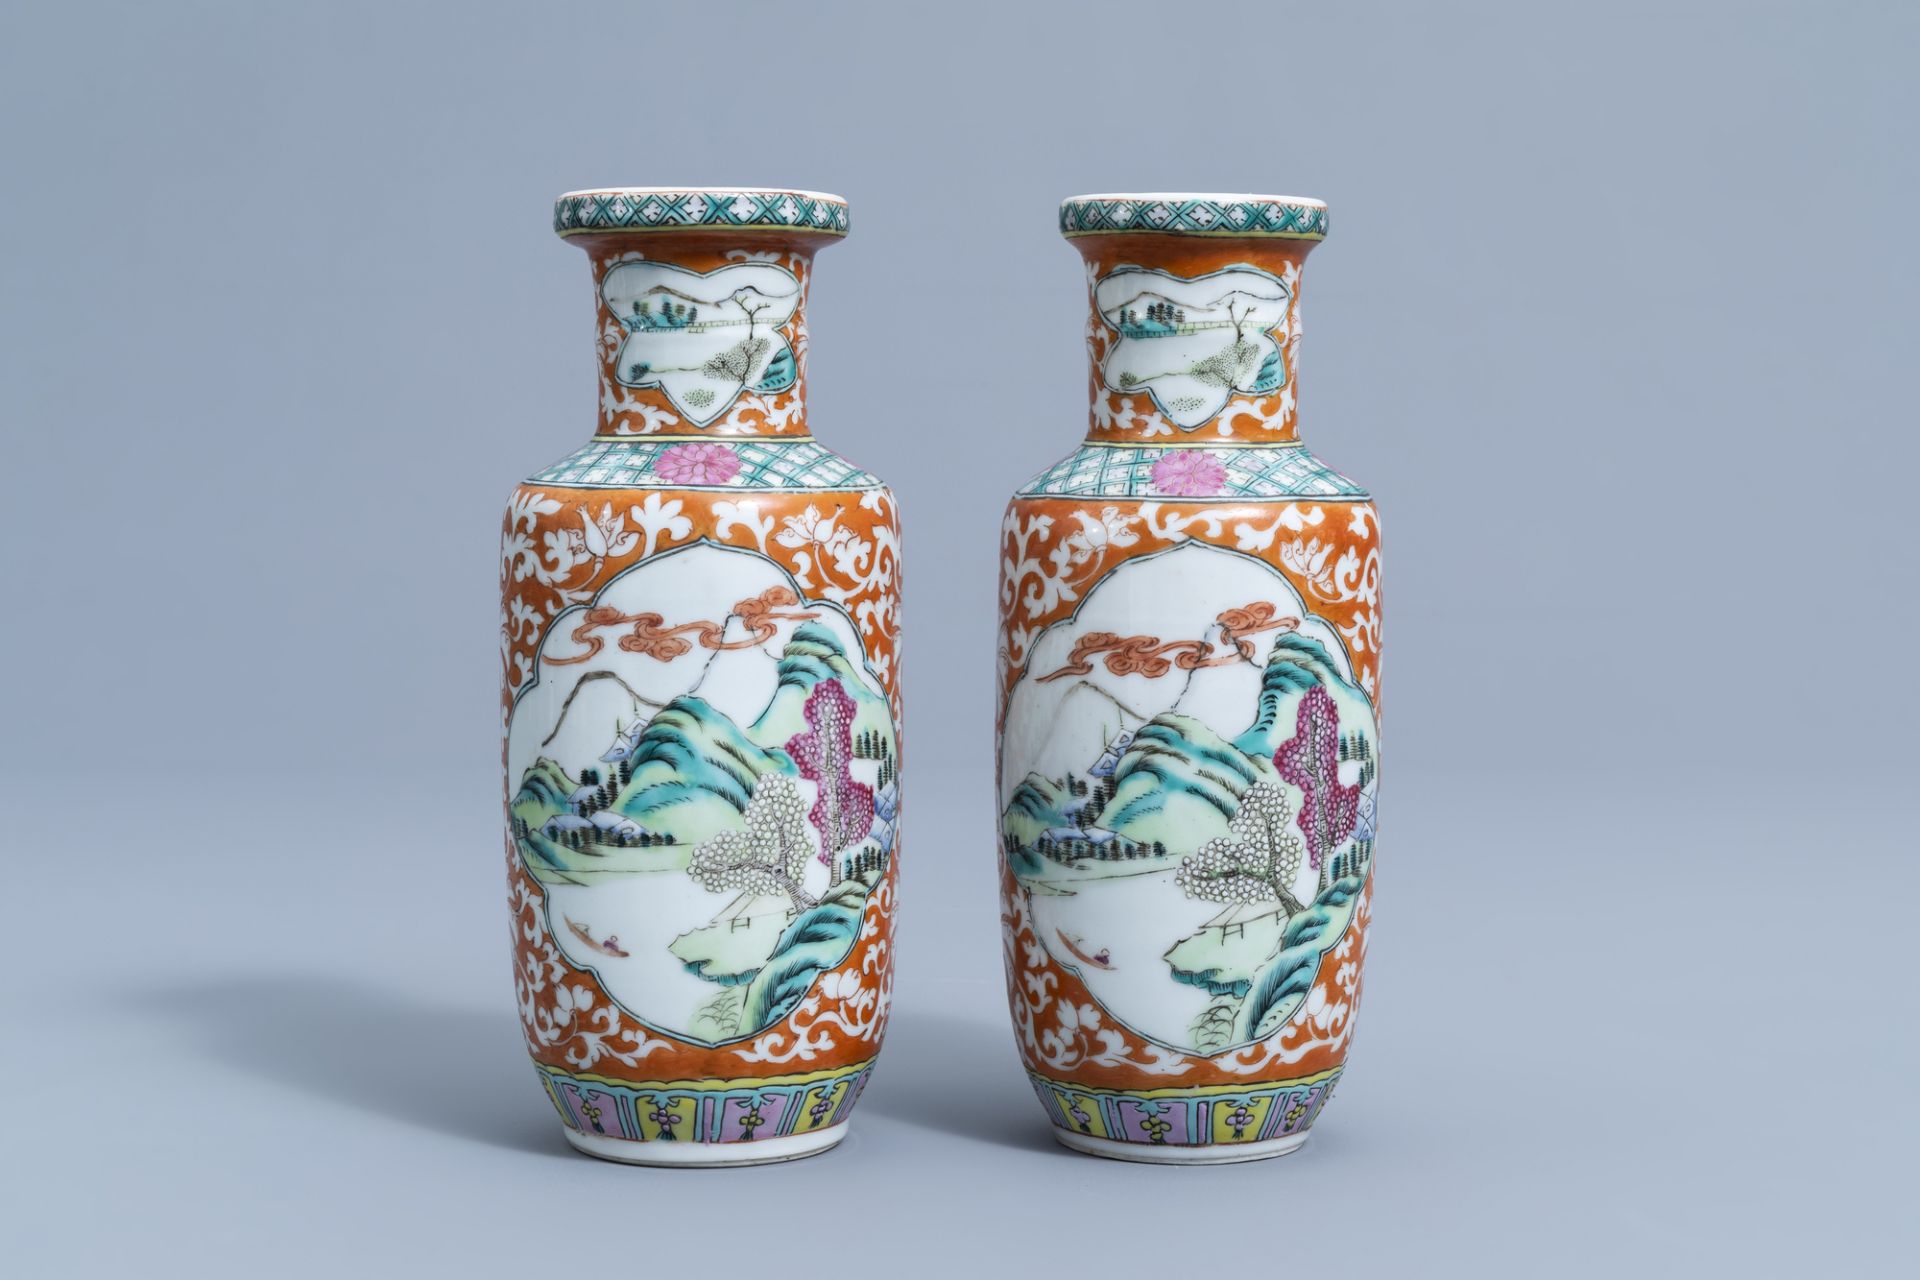 A pair of Chinese famille rose vases with animated river landscapes, 19th C.